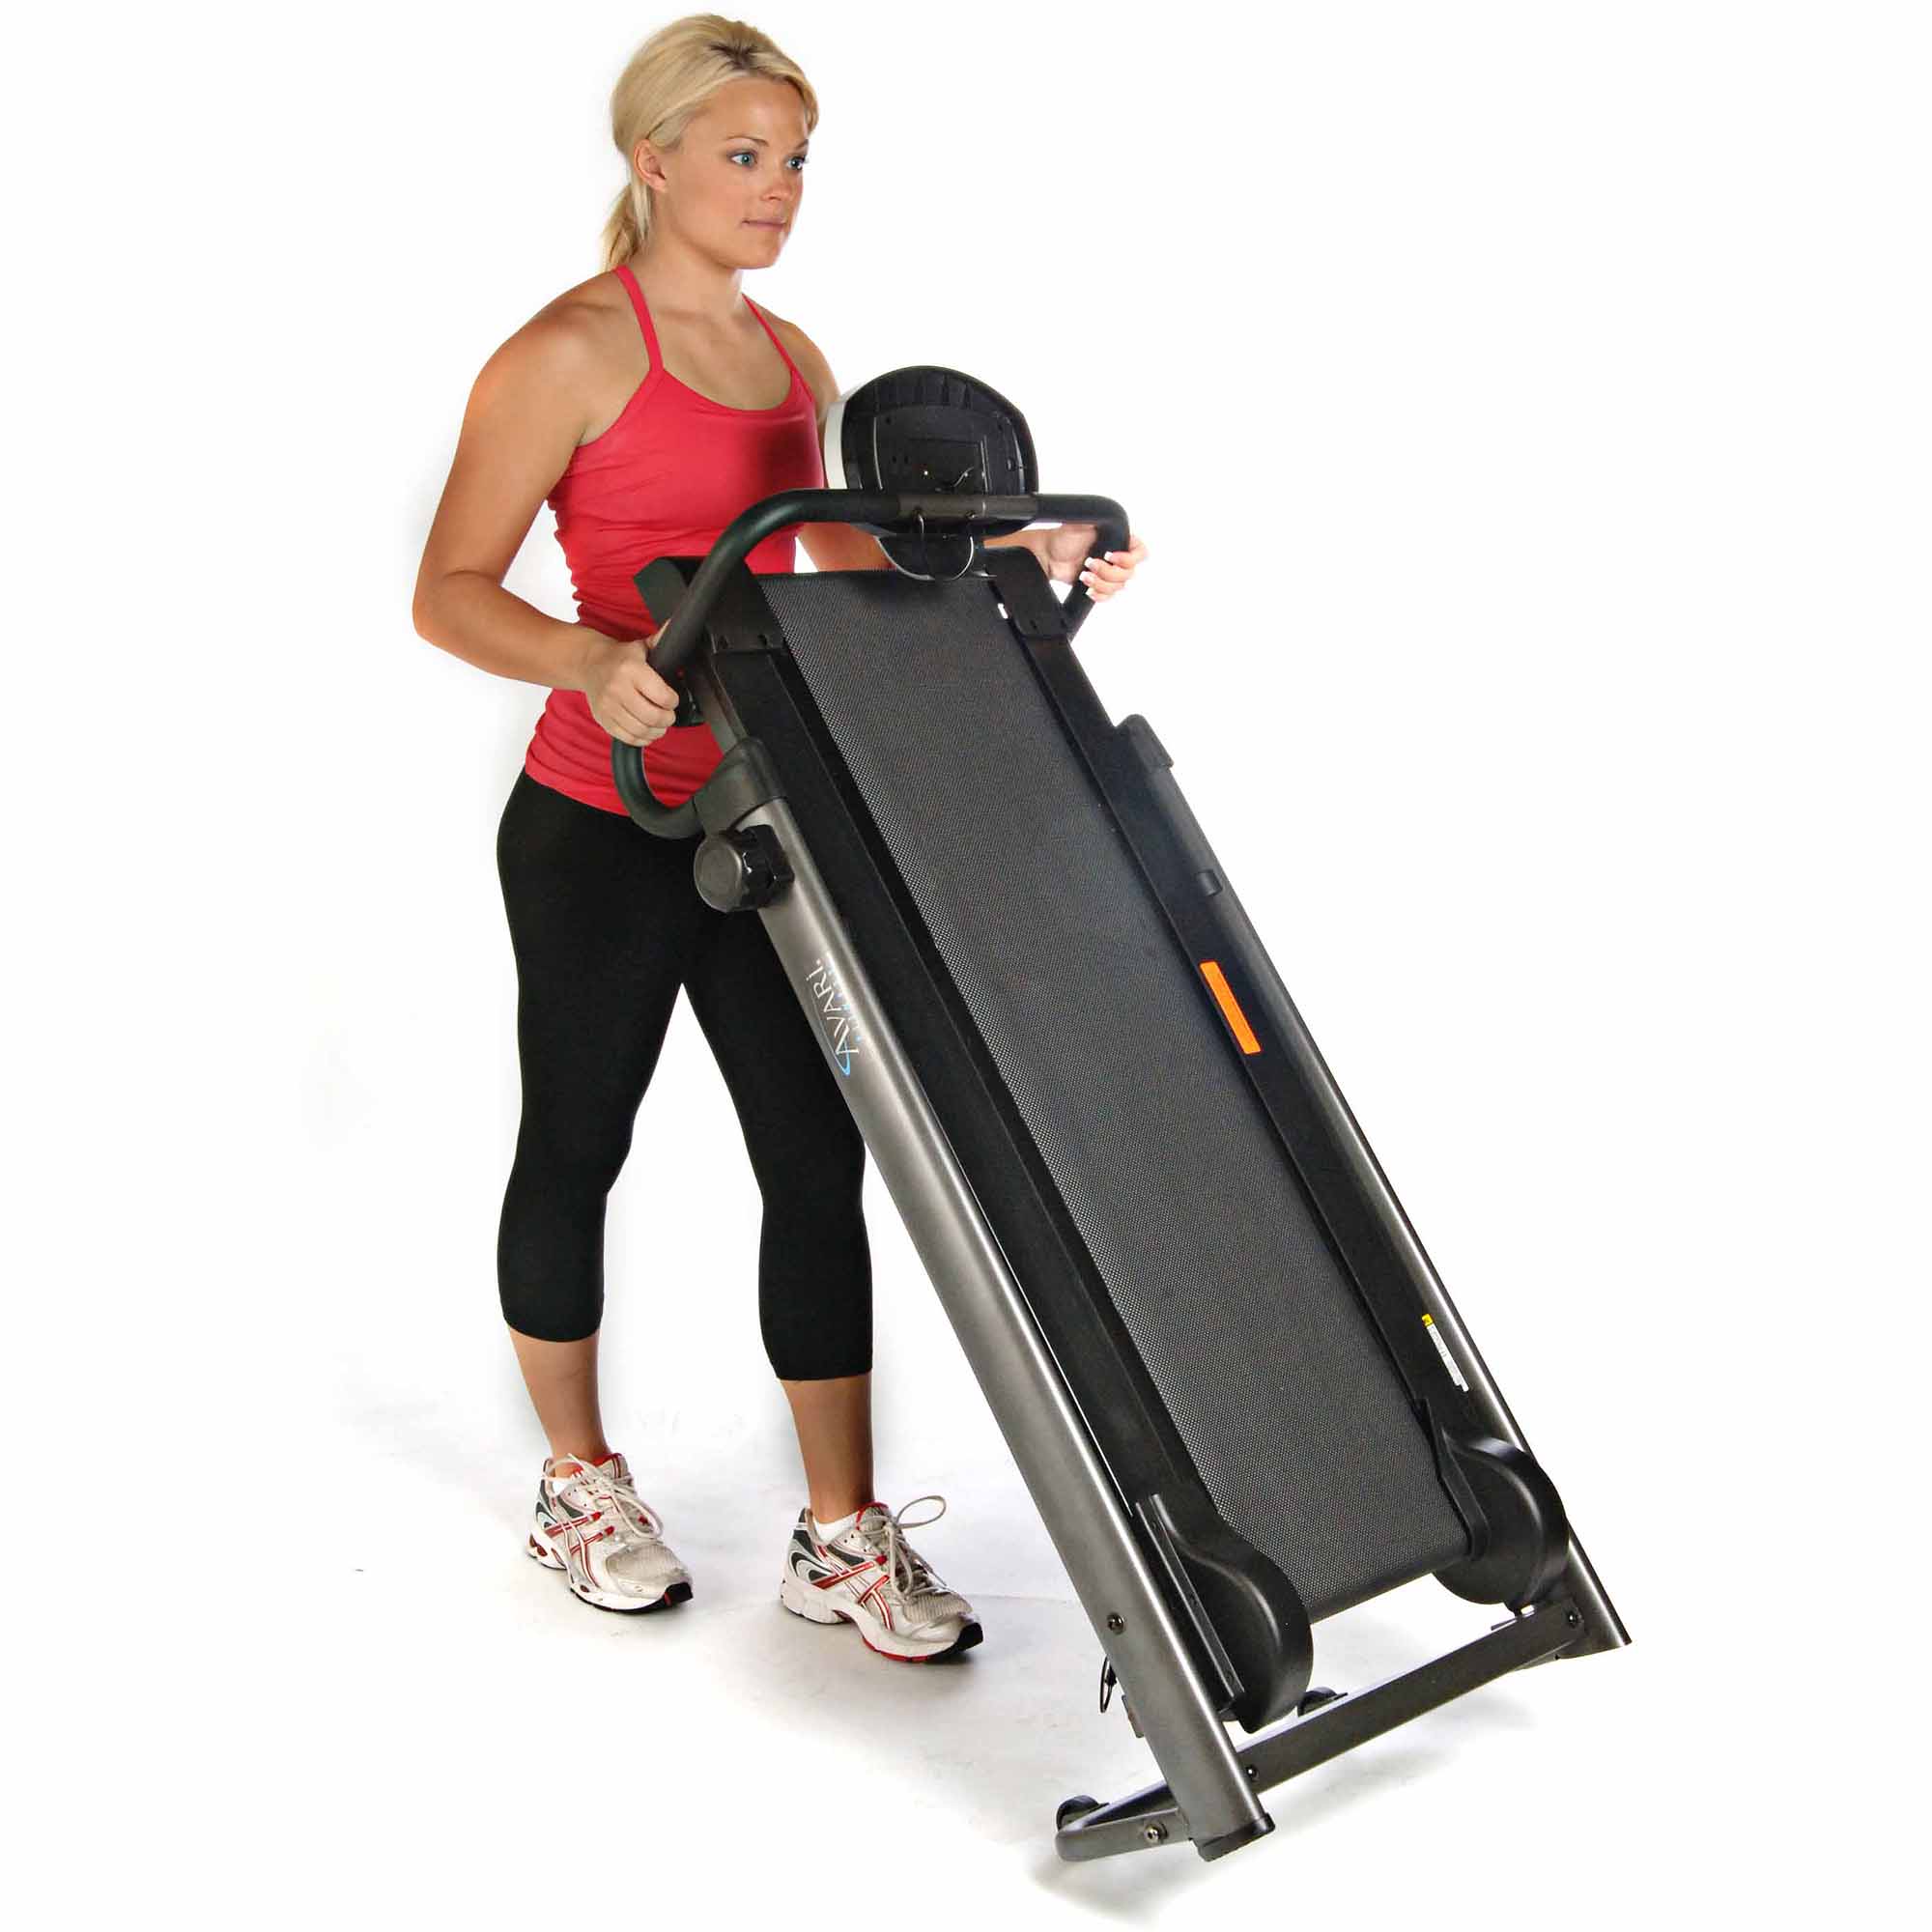 Stamina Products A450-255 Avari Non Electric Magnetic Resistance Treadmill - image 6 of 9